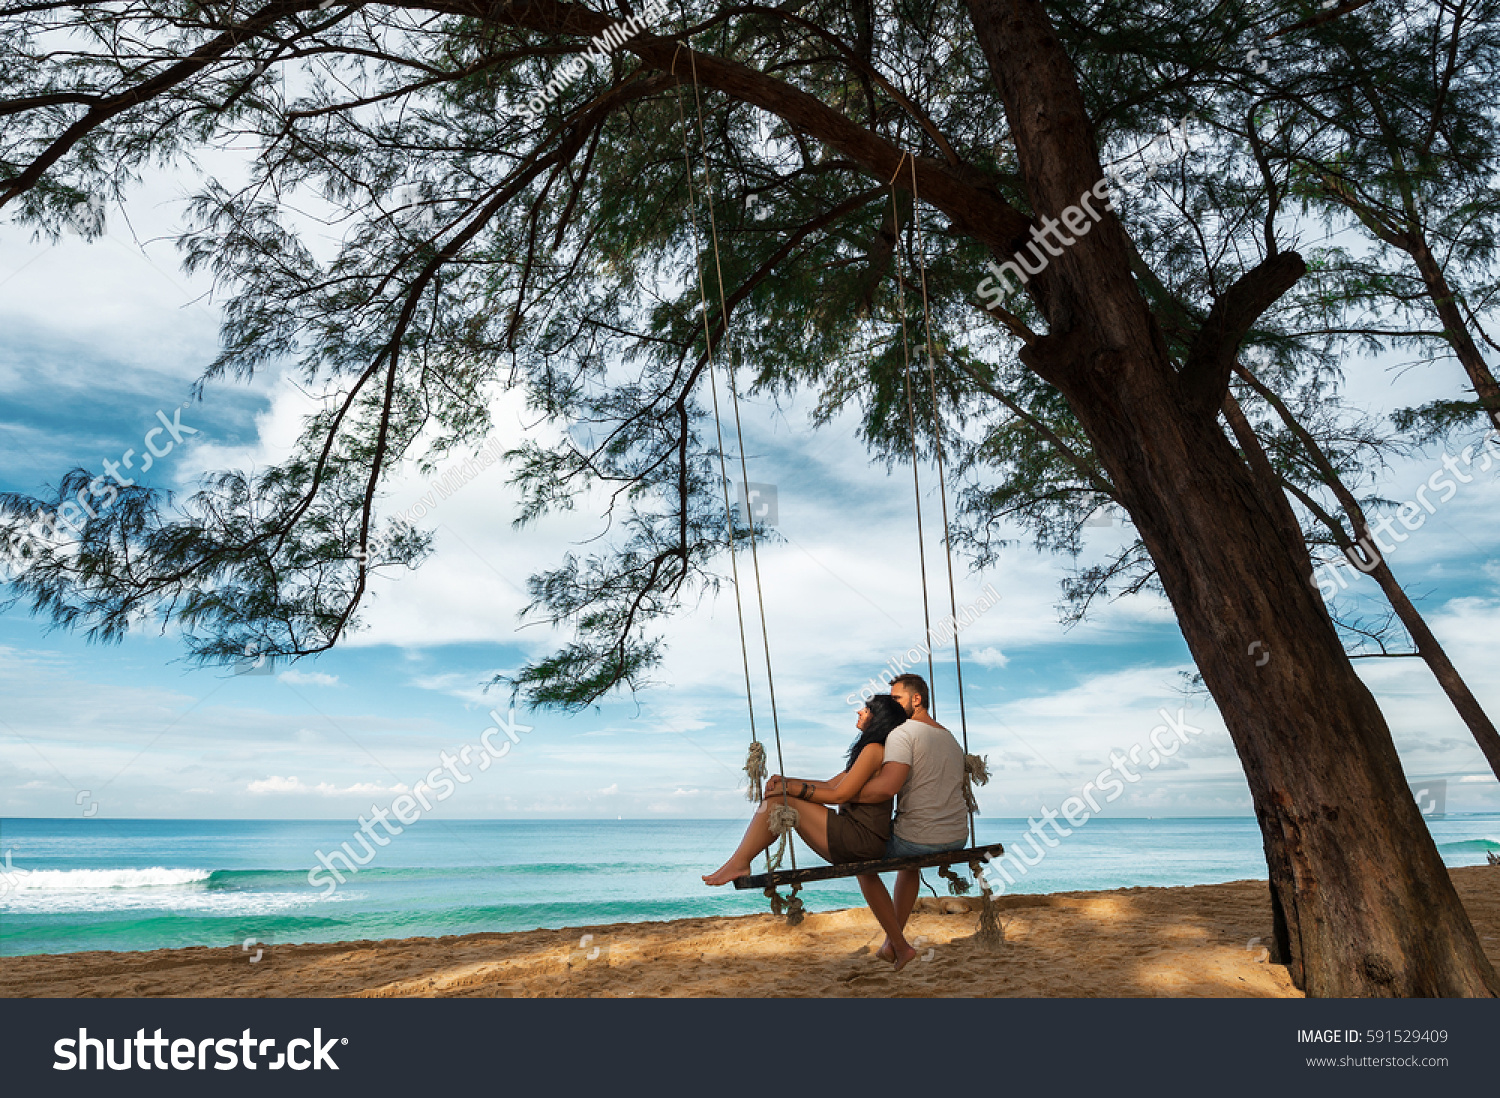 Couple in love on a swing by the sea. Couple in love on an island off the coast. Honeymoon. Couple by the sea. Man and woman travel to beautiful places. Honeymoon trip. Relax on the island. In love #591529409